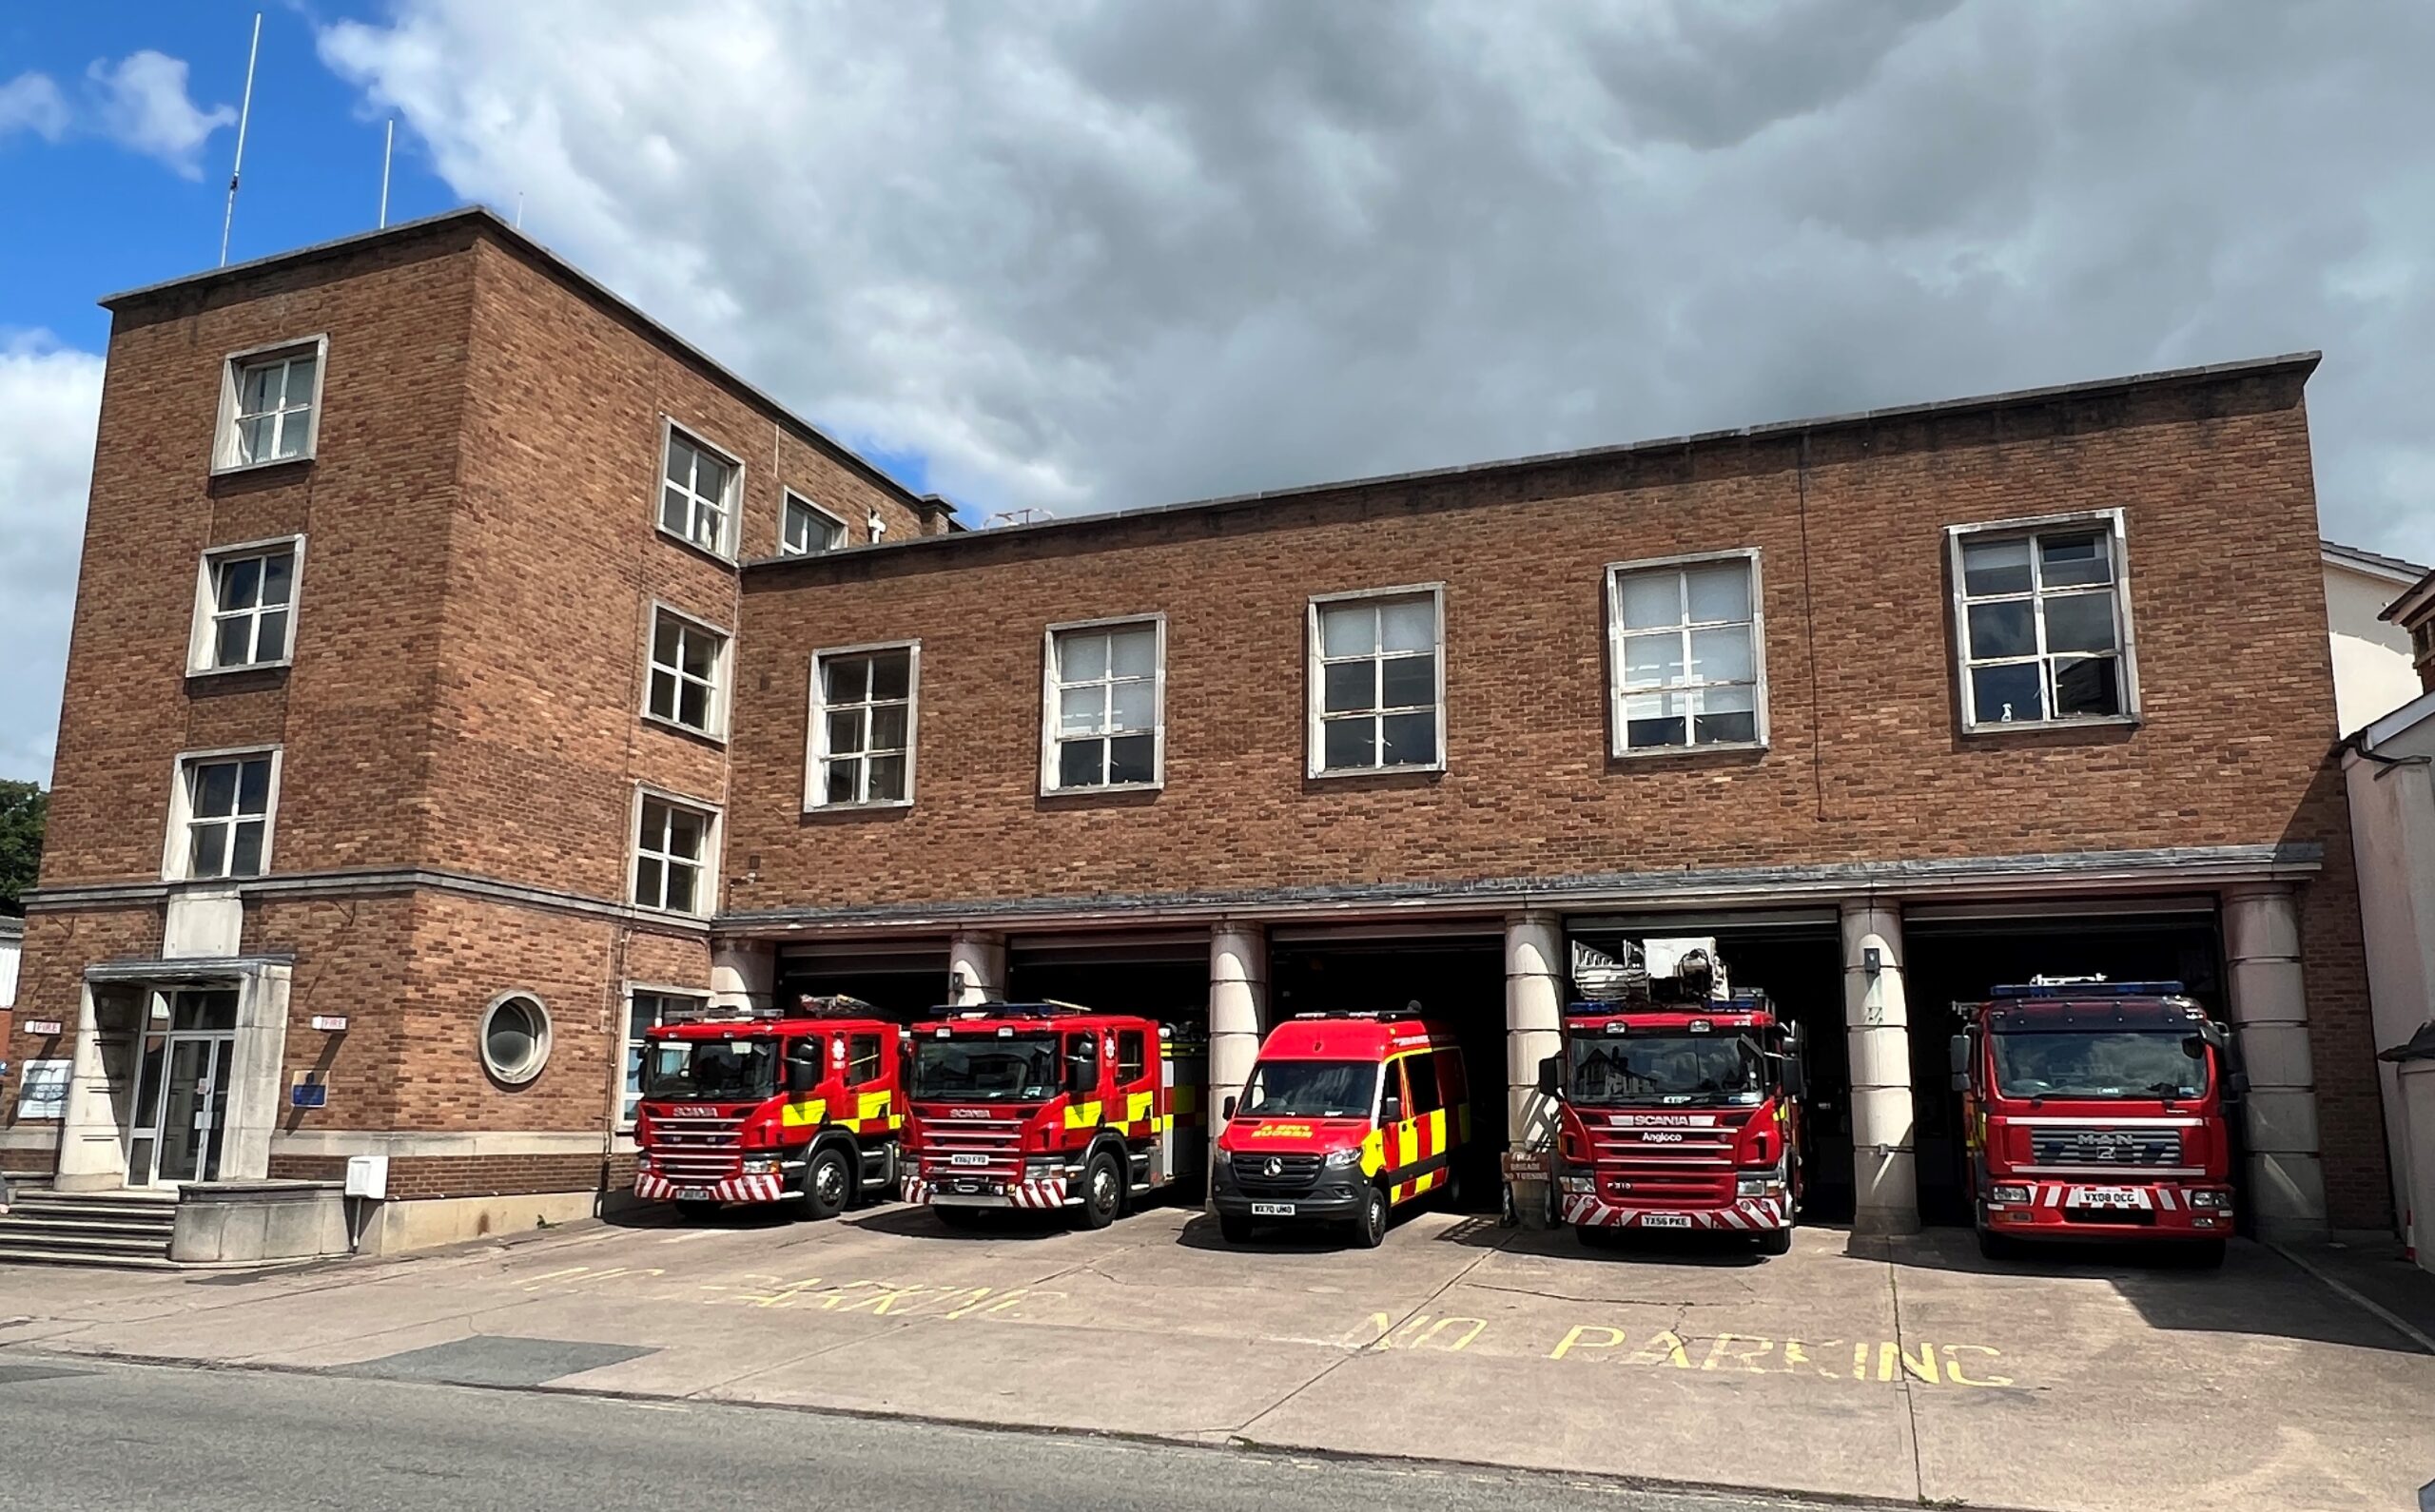 Hereford open day will give insight into life of a firefighter